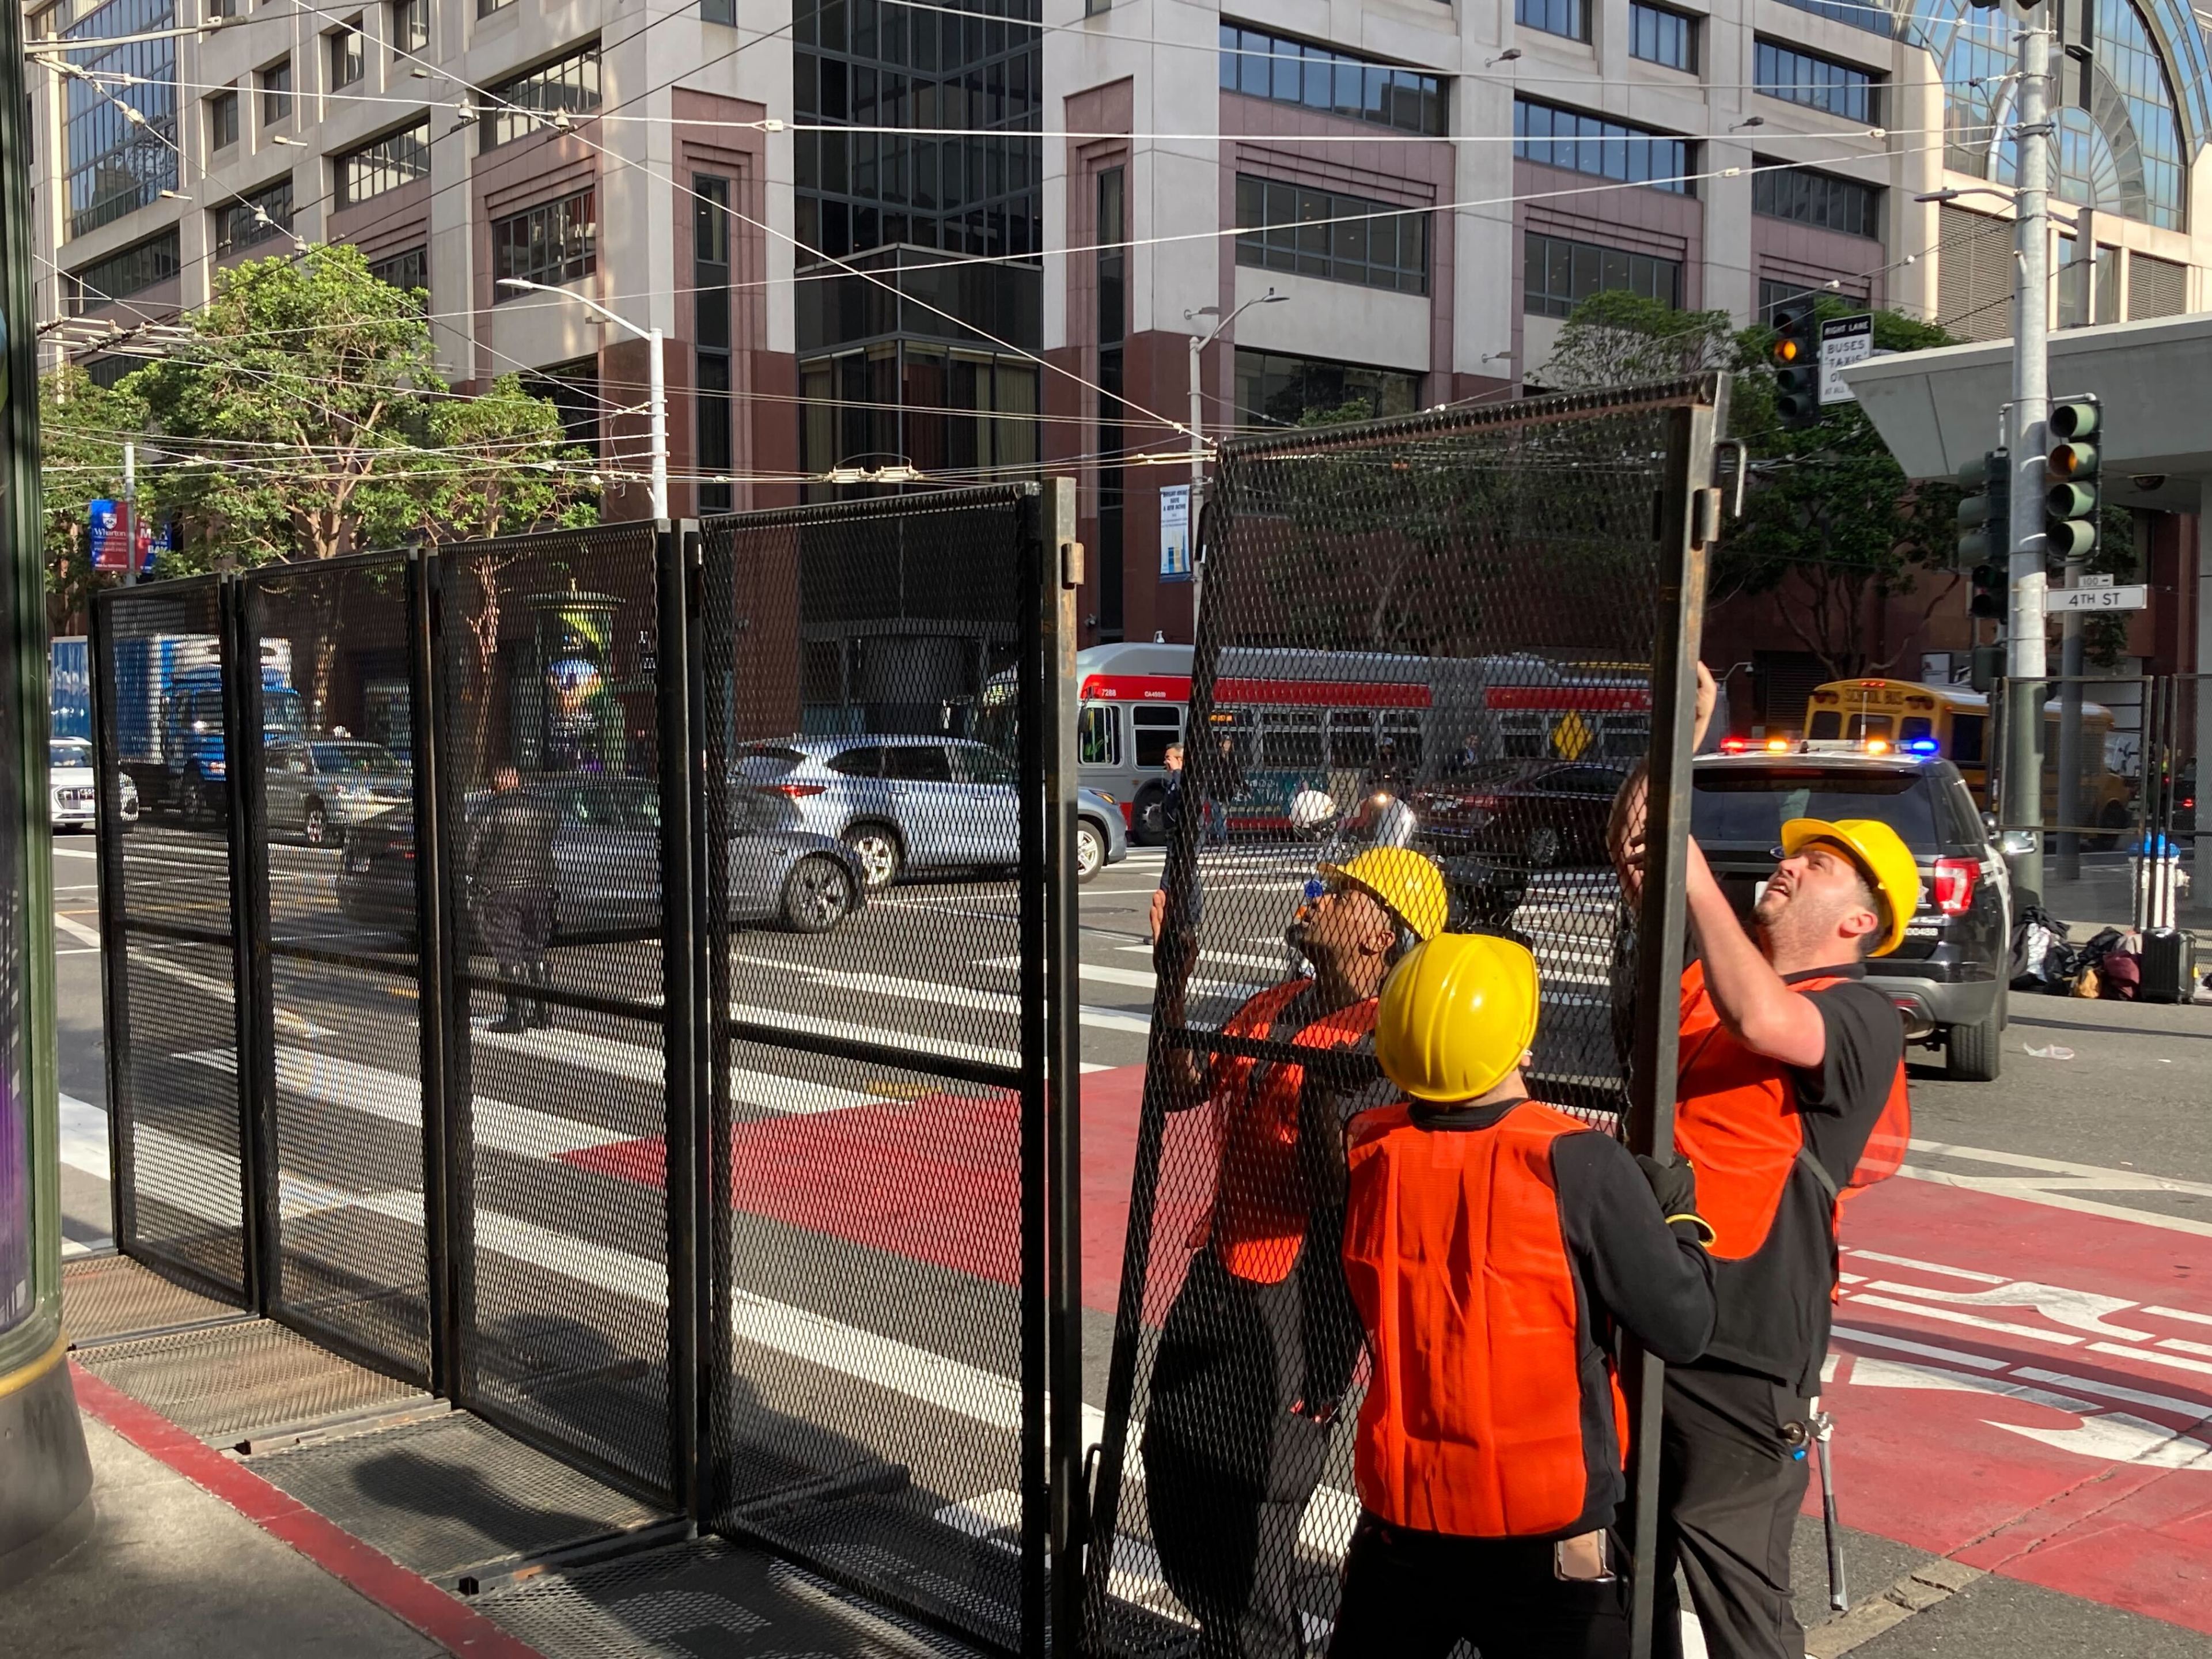 A group of construction workers putting up fencing on a public street with a police vehicle, cars and a bus in the background.